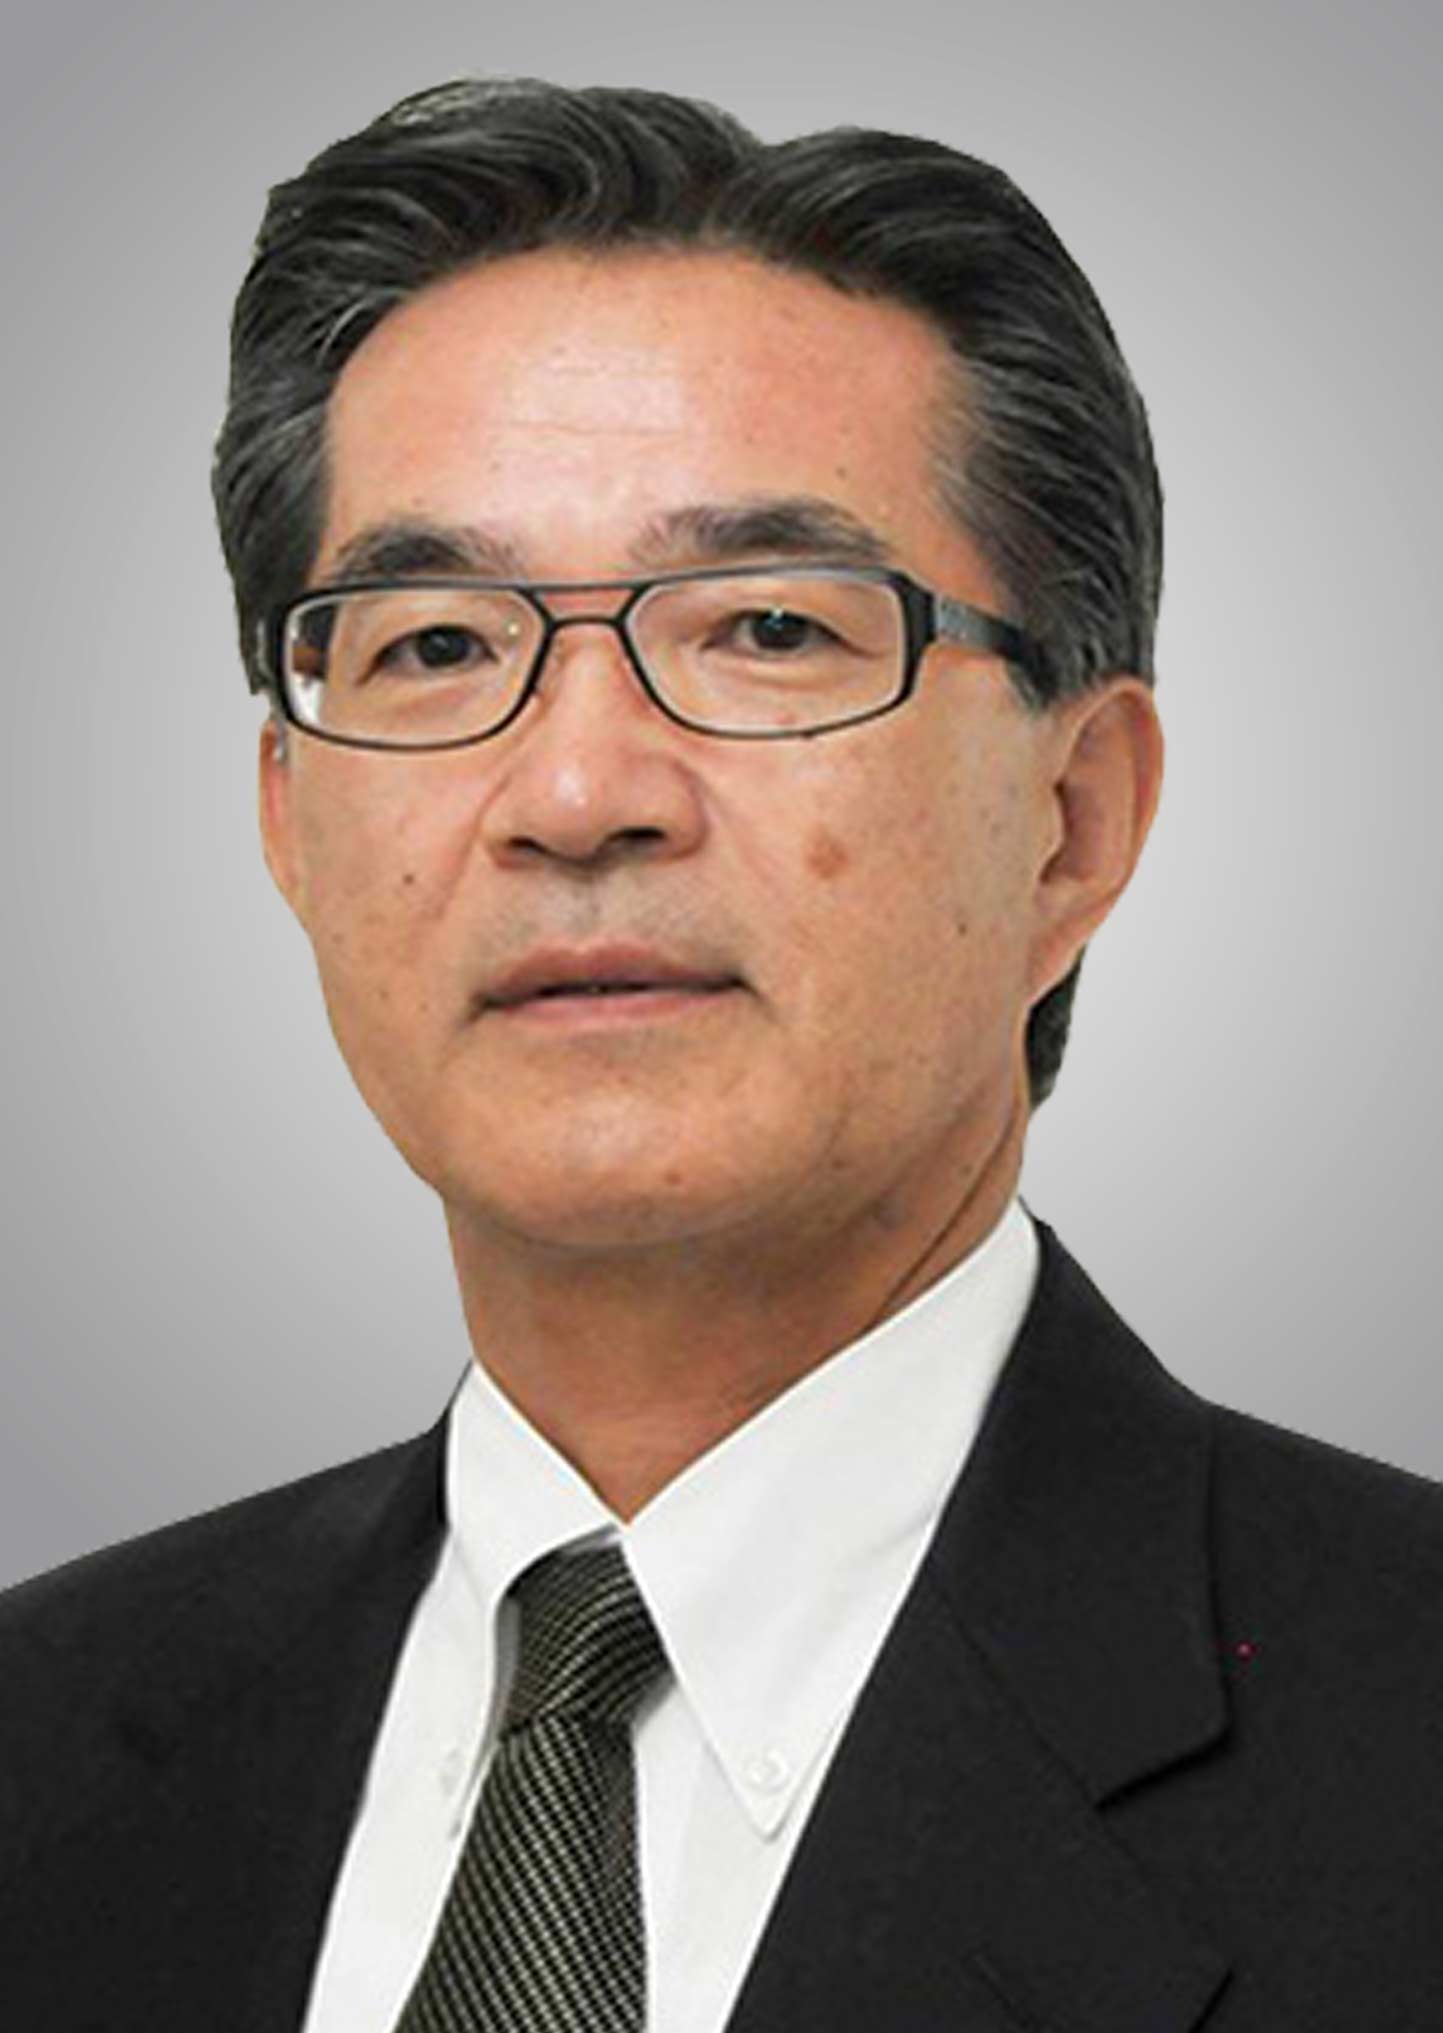 Hideshi Miura is considered one of the leading Japanese academics in powder metallurgy.